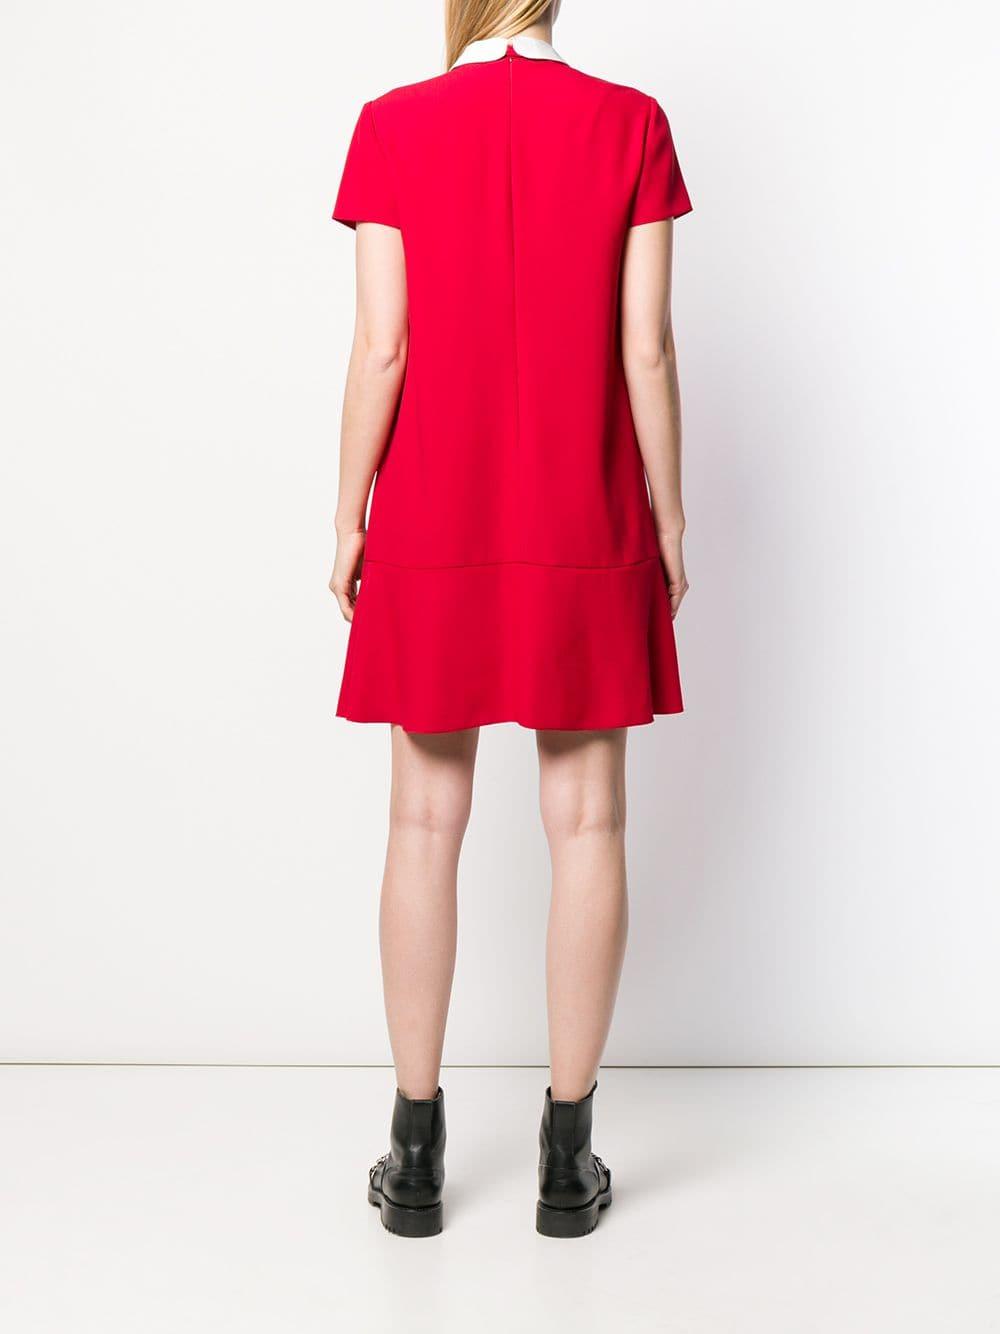 RED Valentino Pussy Bow Mini Dress in Red - Lyst